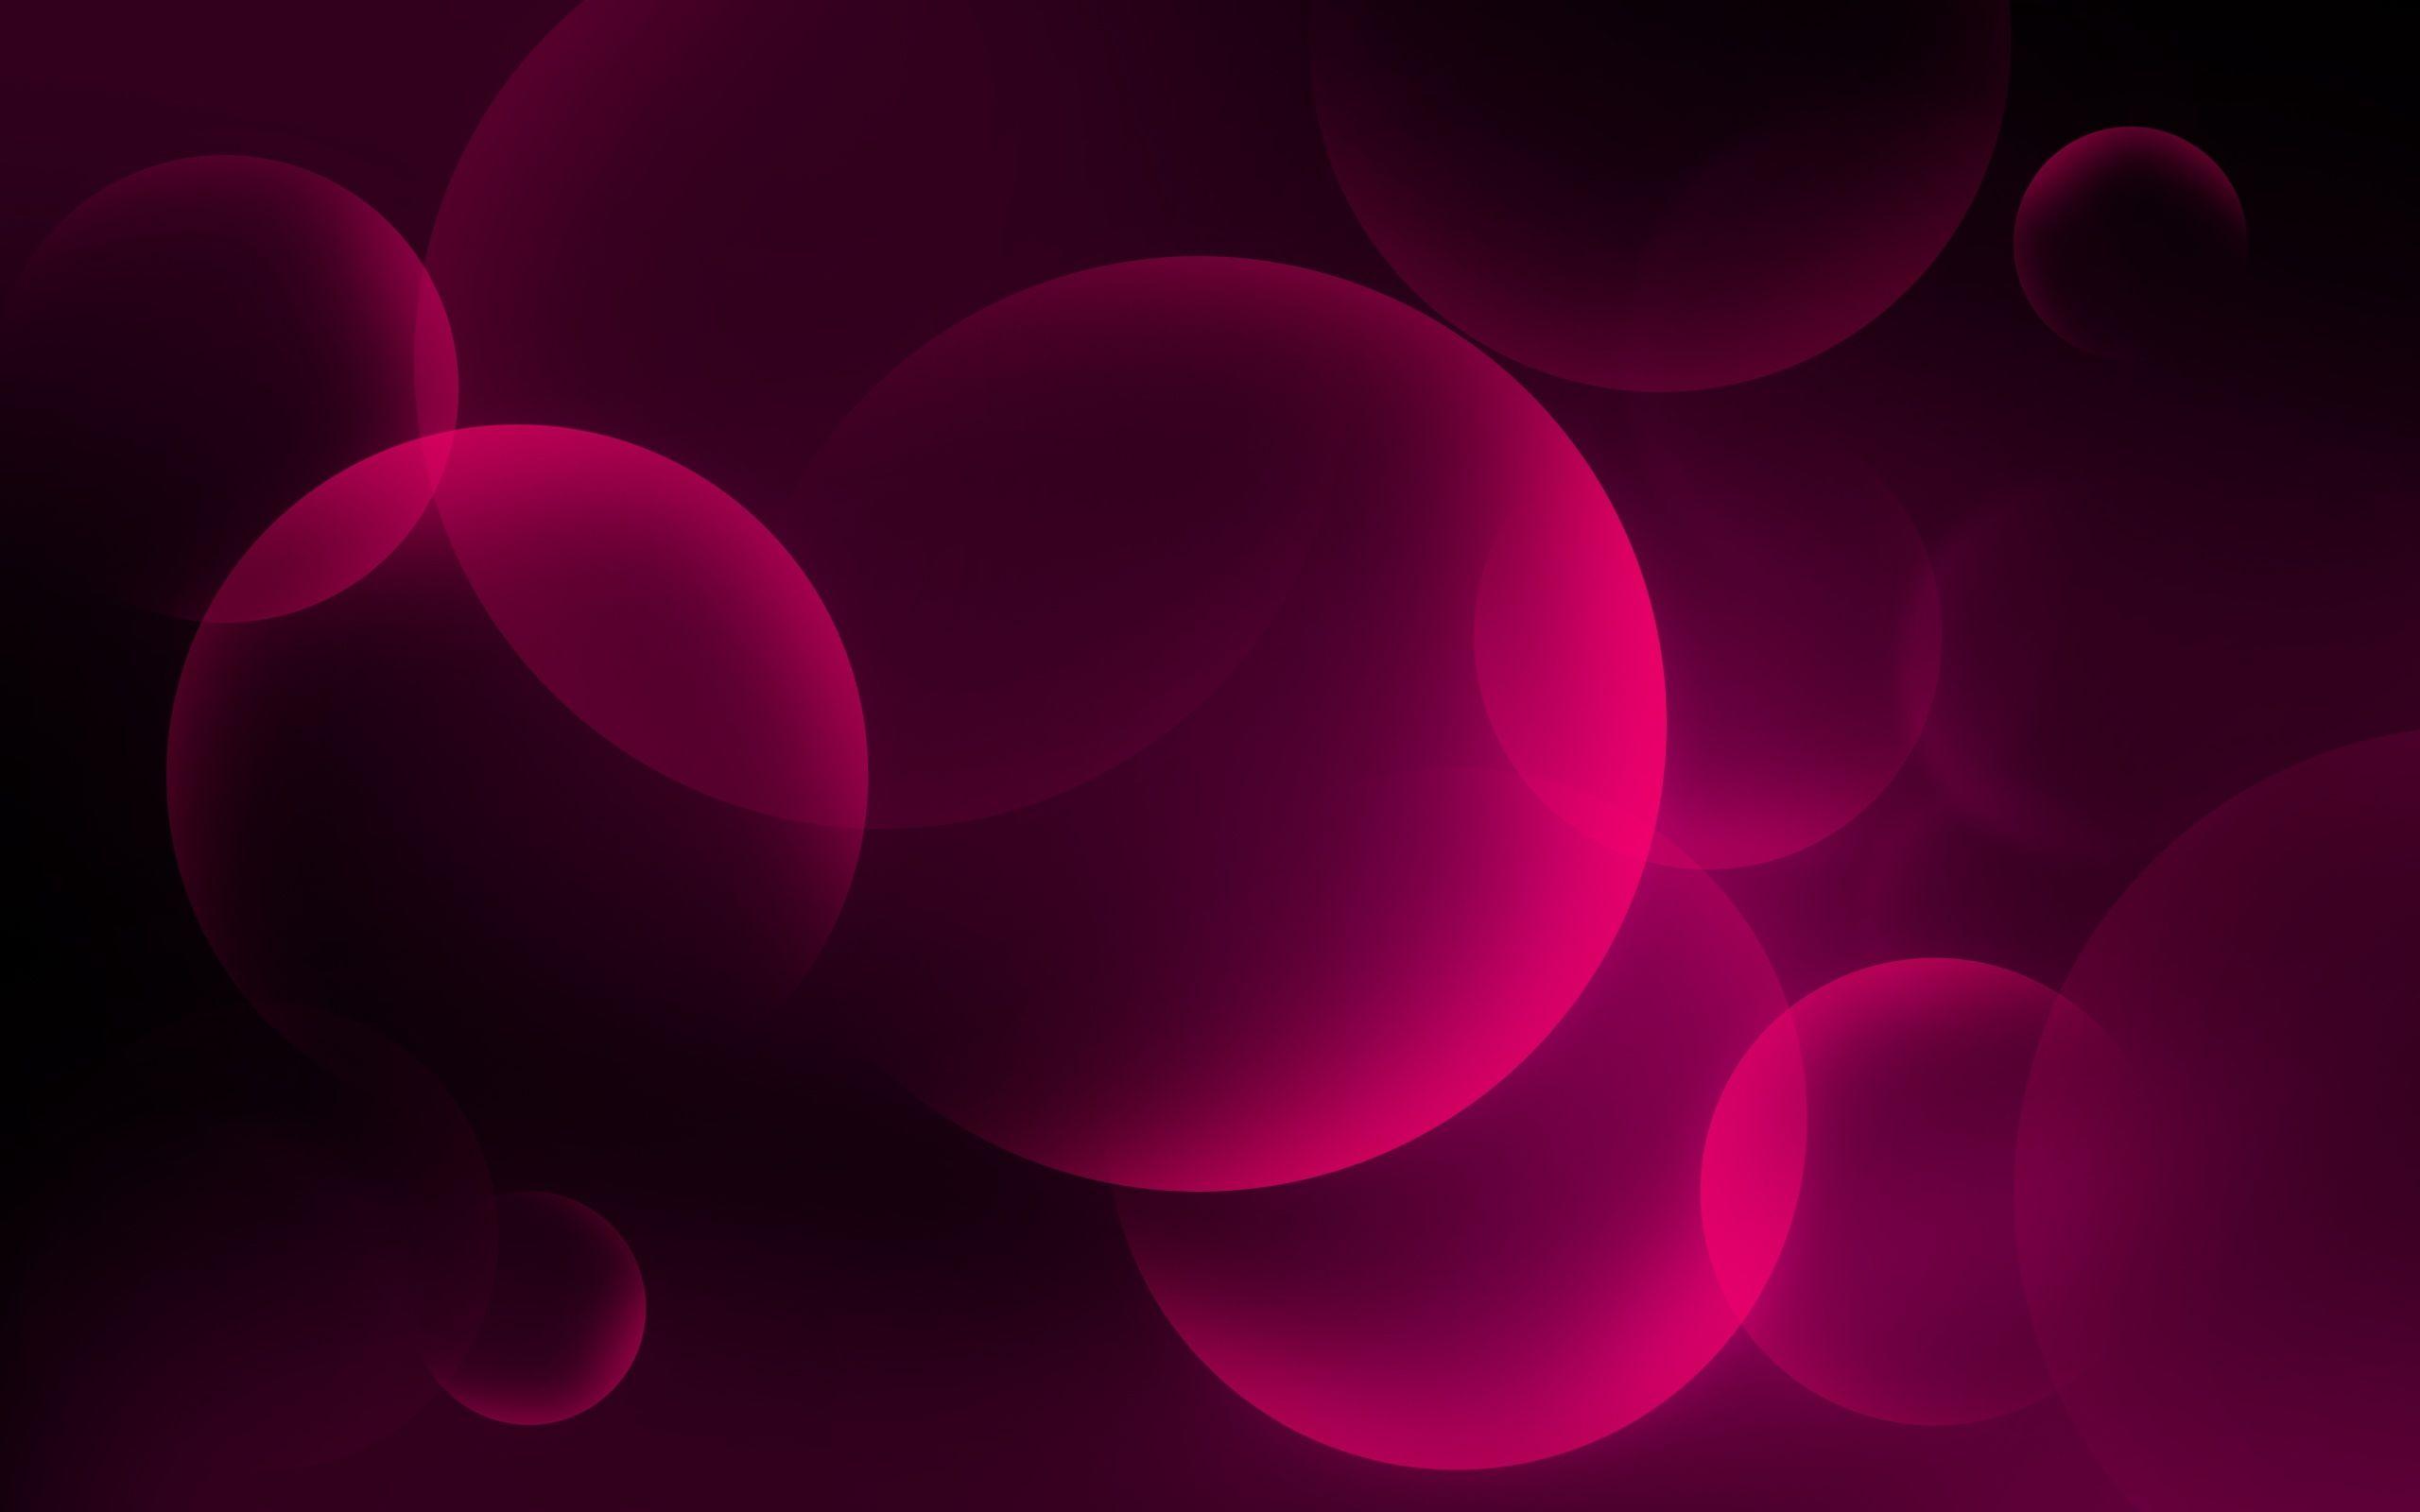 Pink and Black Wallpaper 23780 2560x1600 px